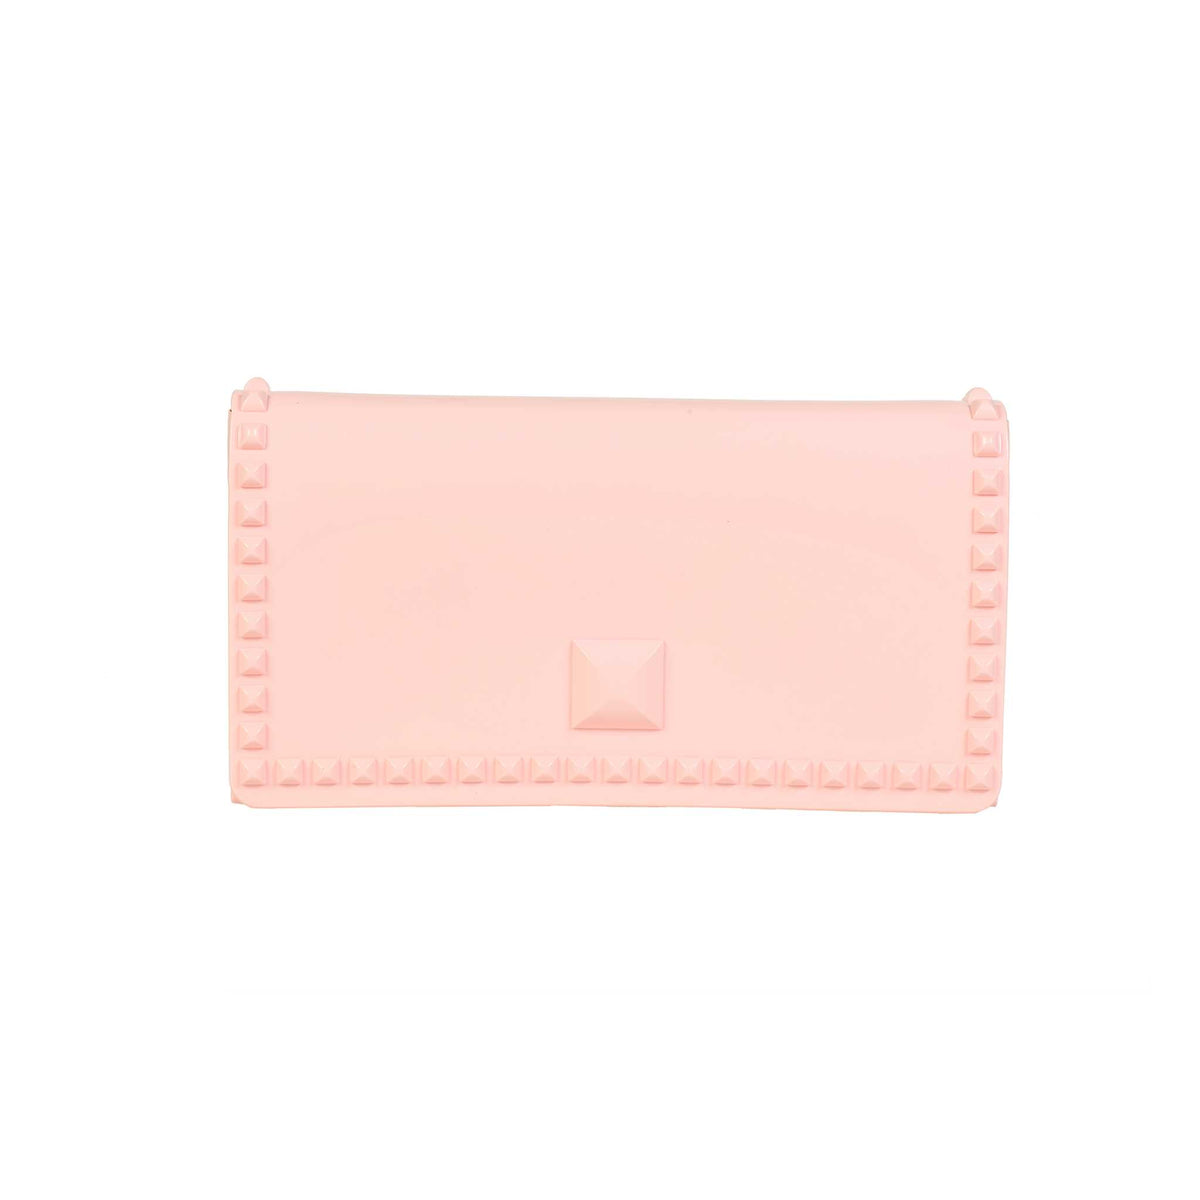 baby pink Carmen Sol studded jelly purse for the beach and beyond